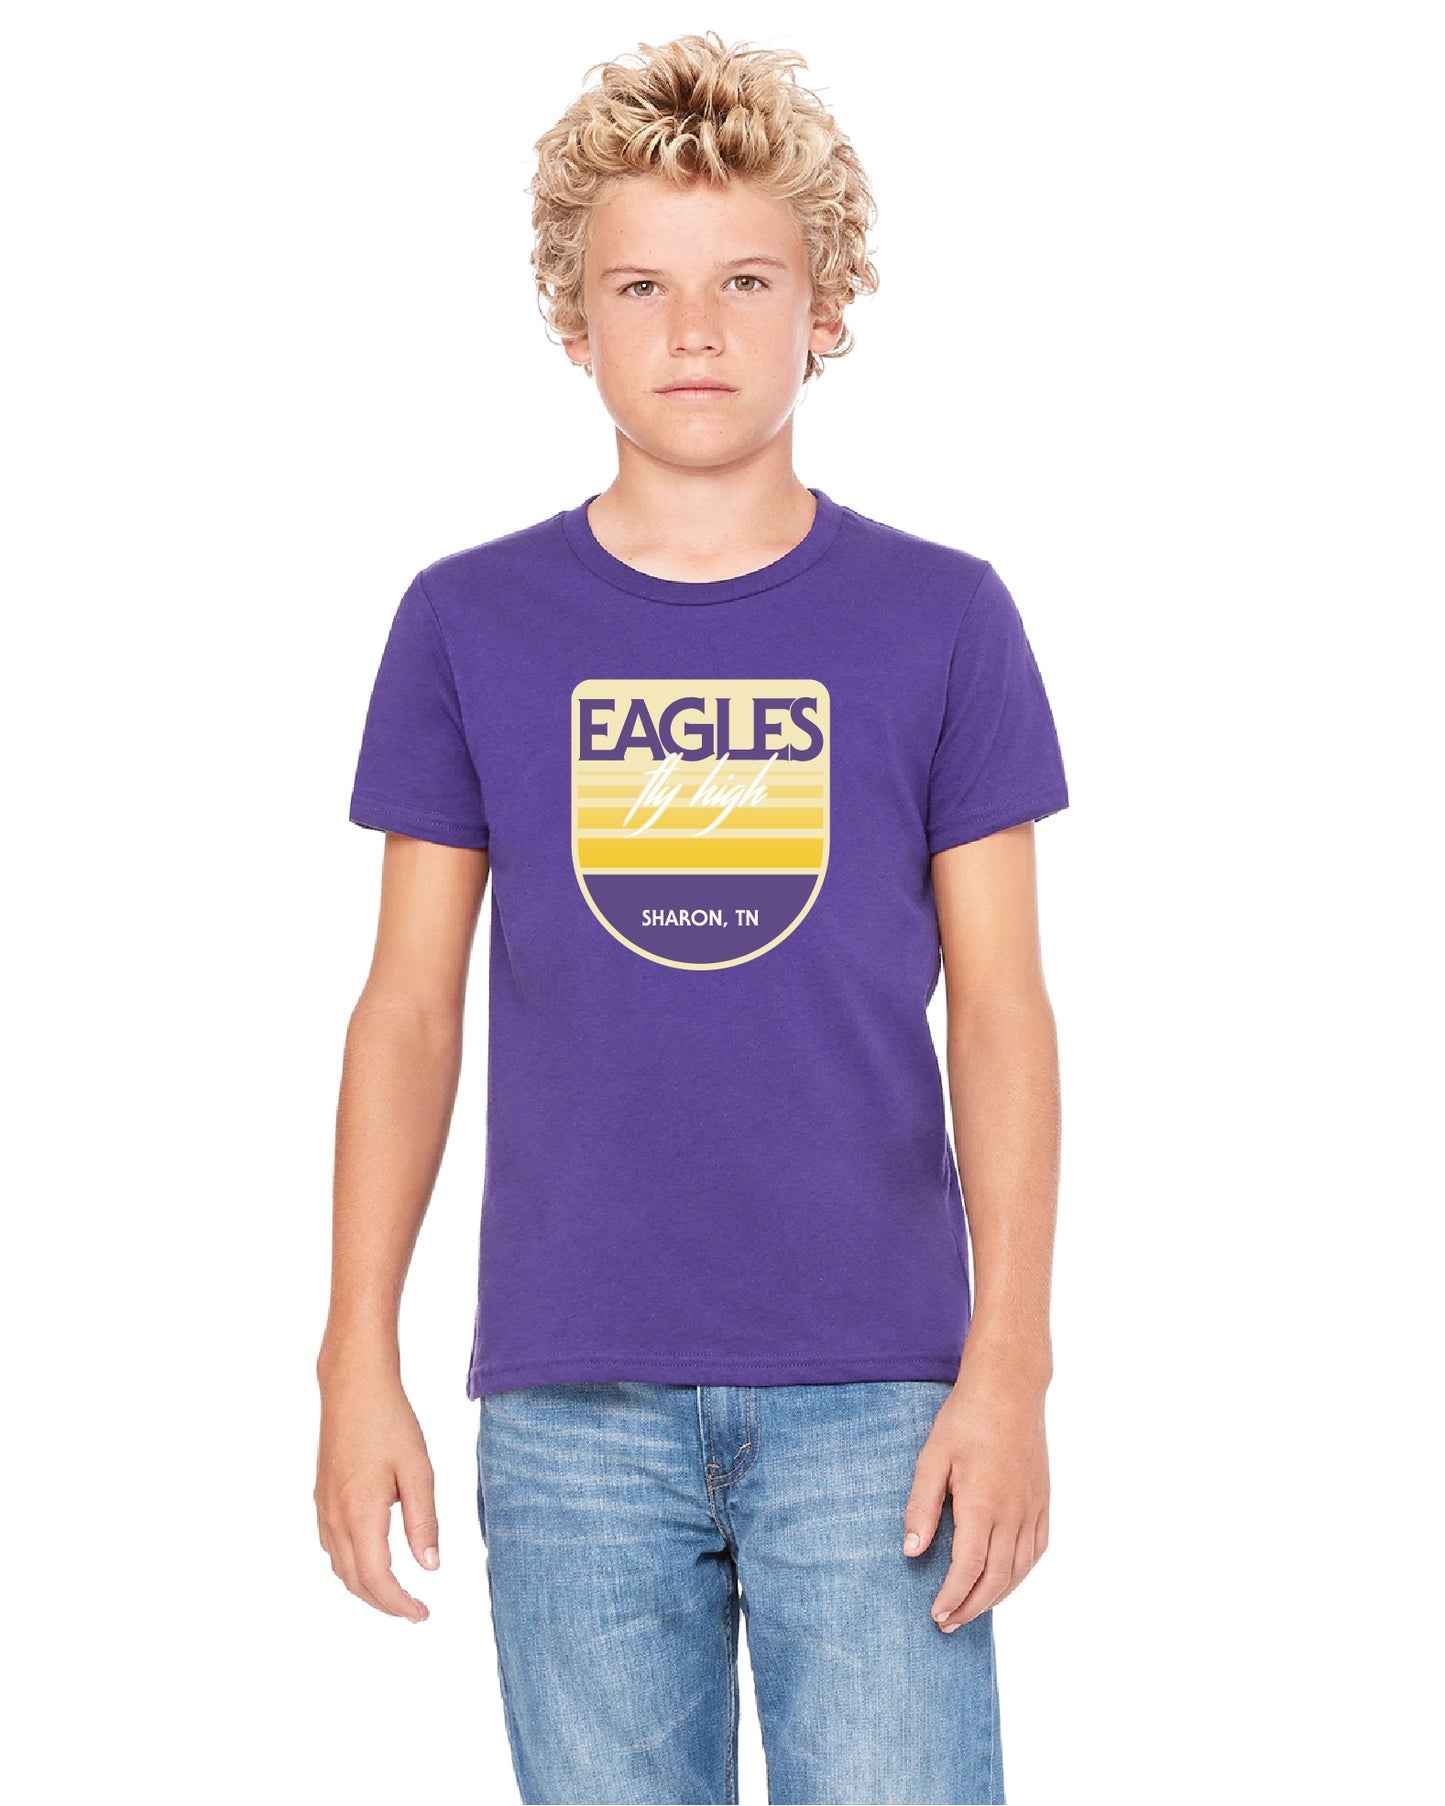 Eagles Fly High Youth T-shirt